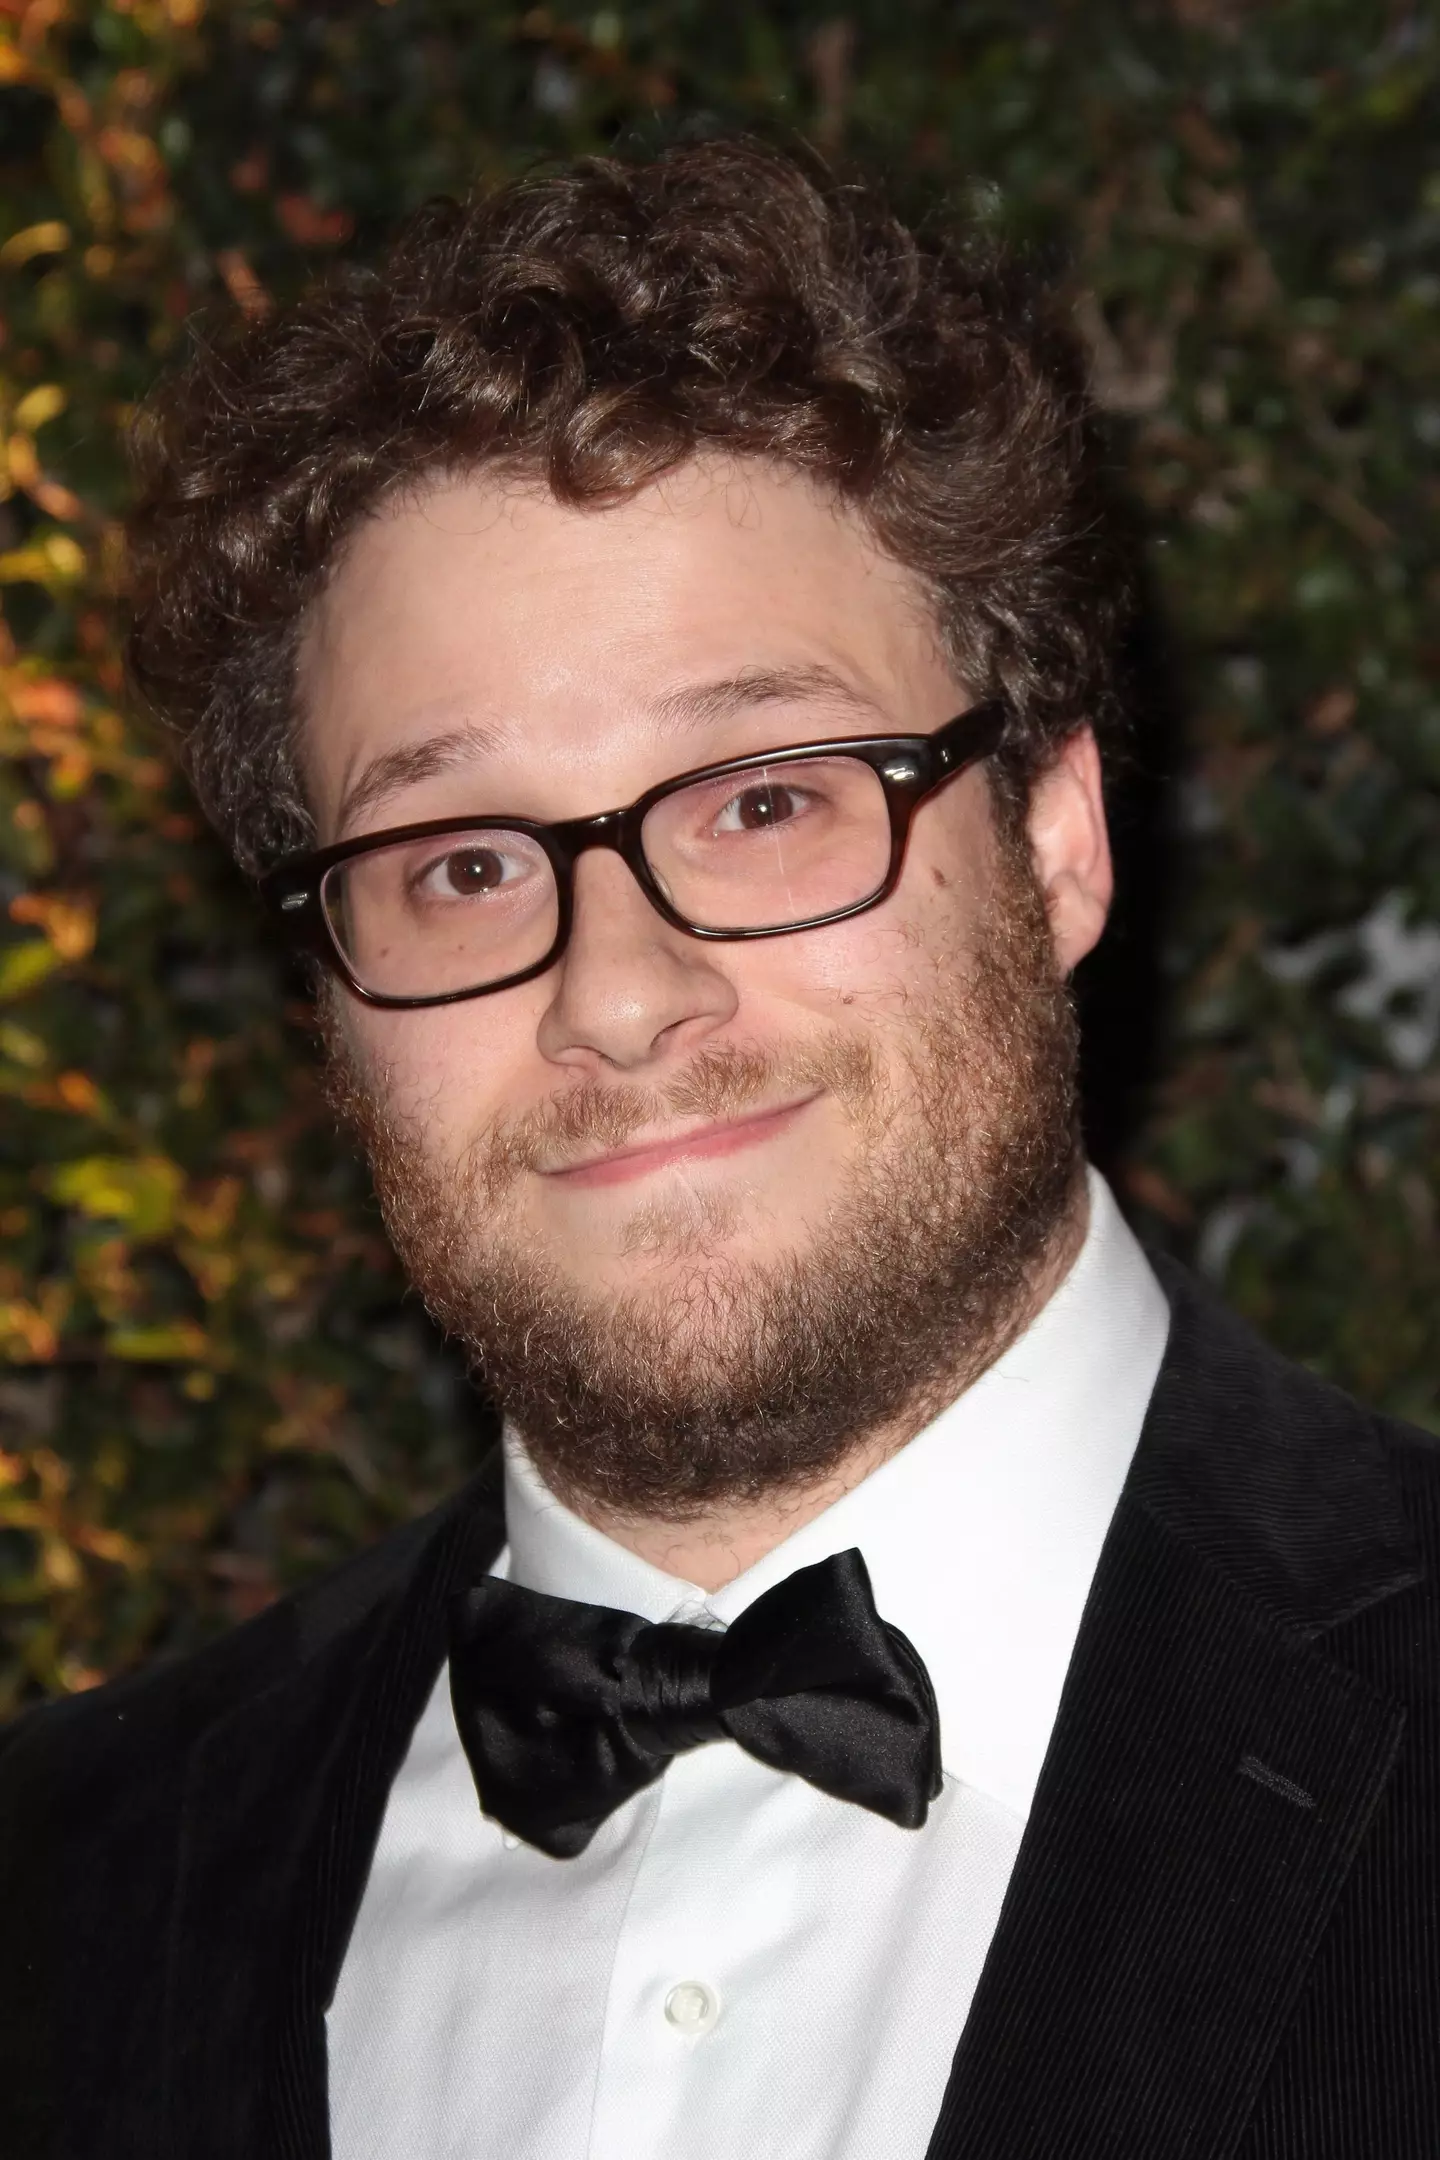 Super Mario fans have been left divided by Seth Rogen's performance.